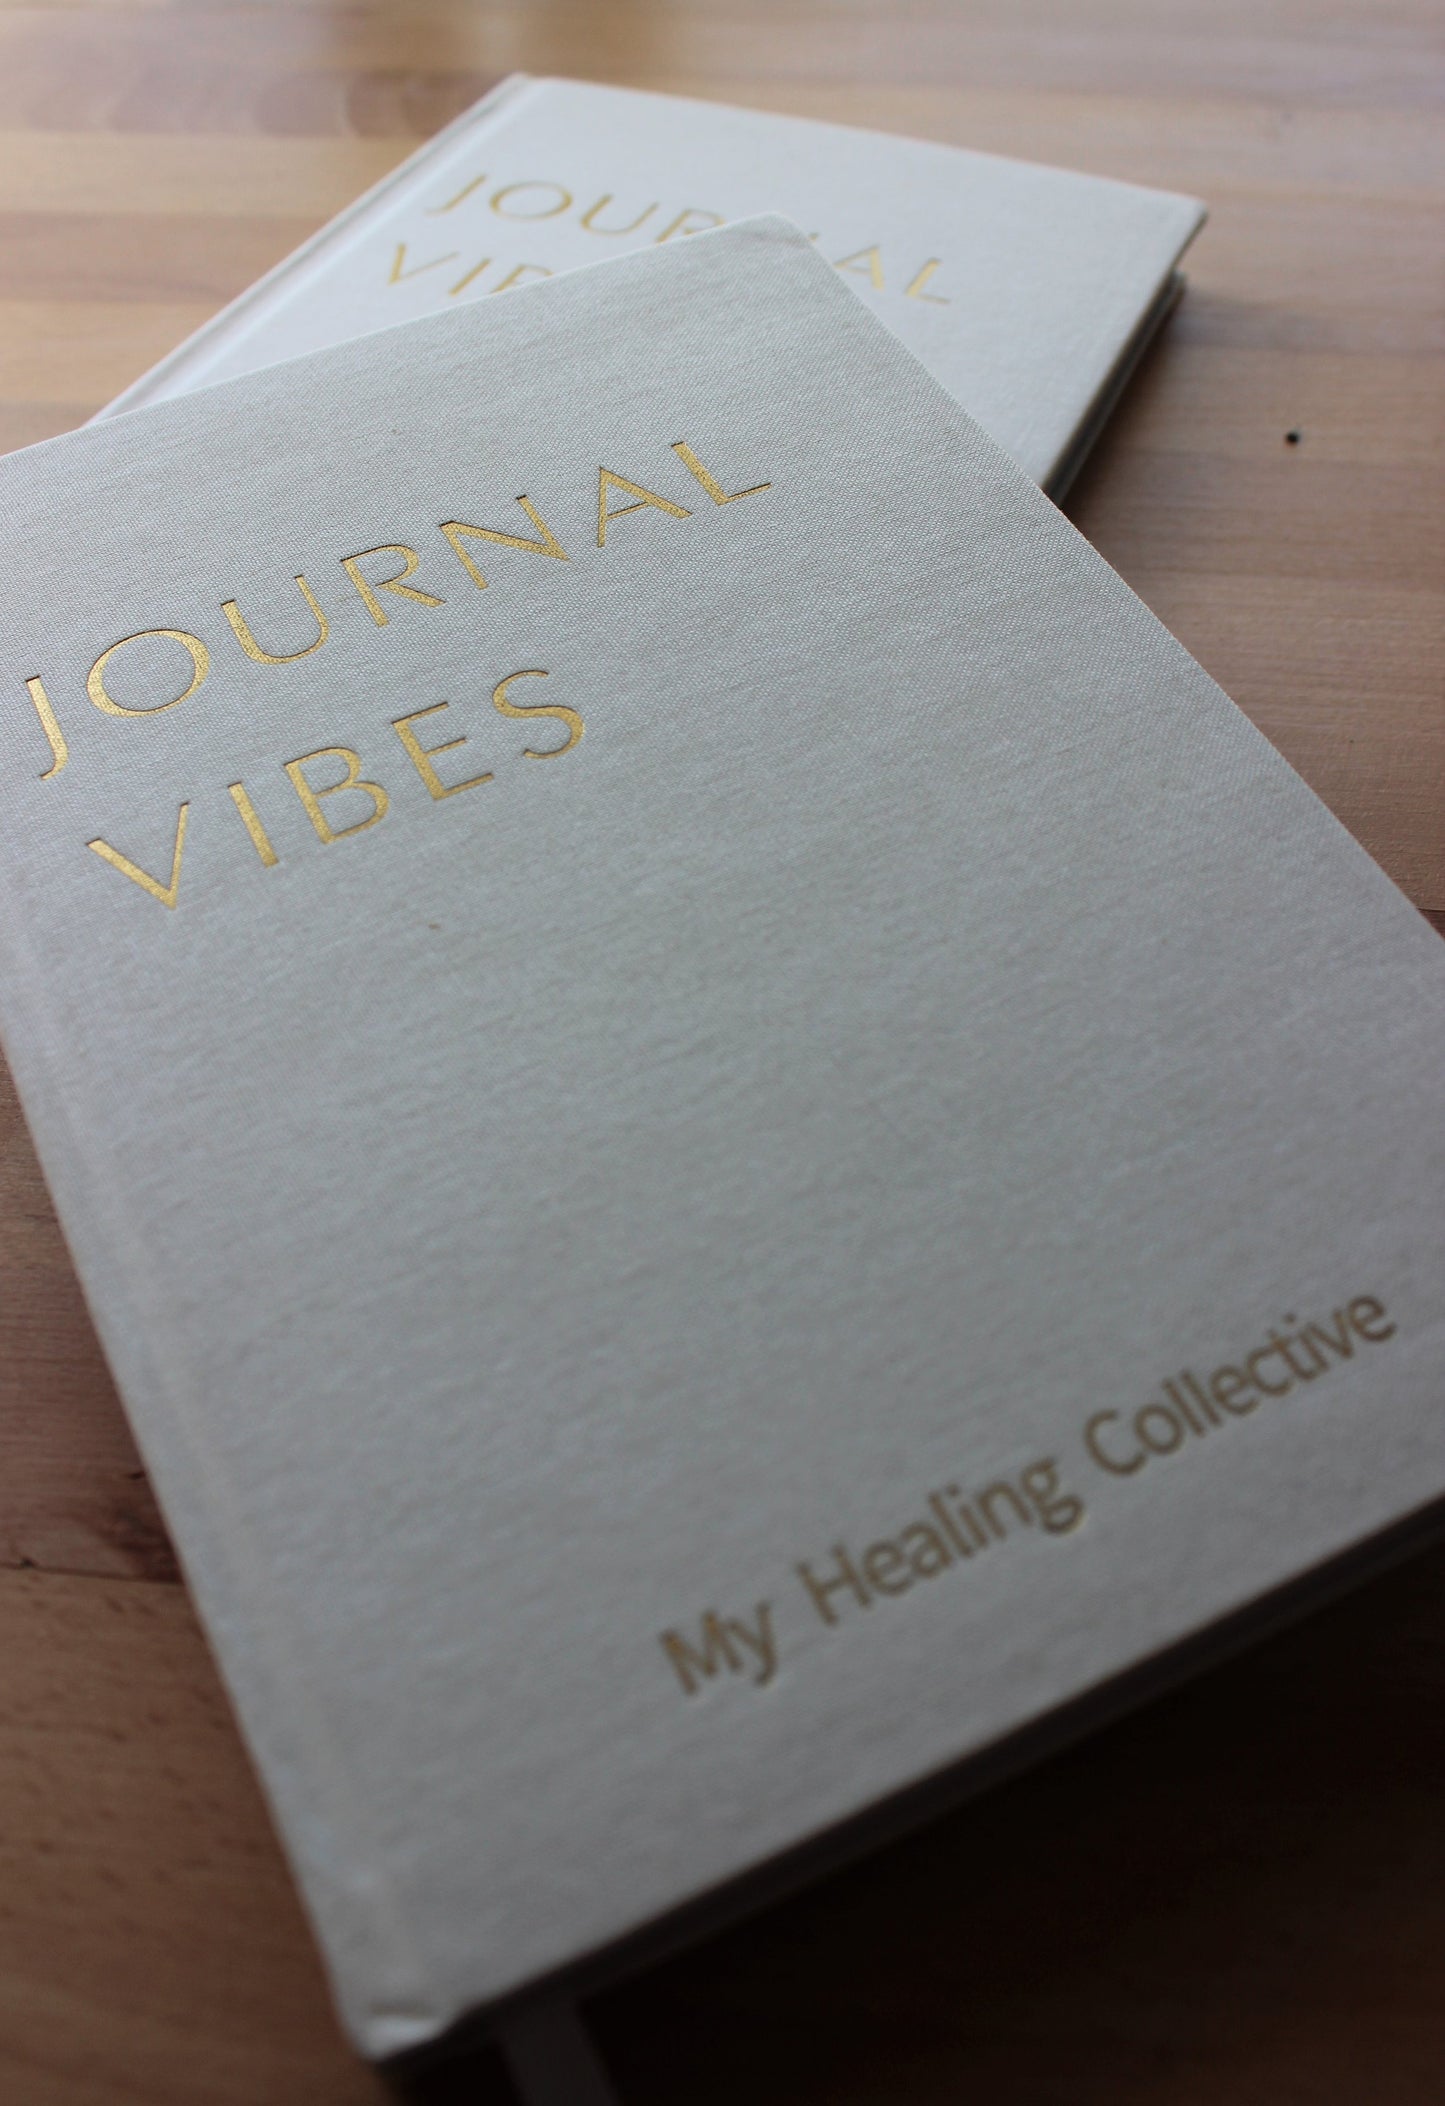 Journal Vibes - My Healing Collective